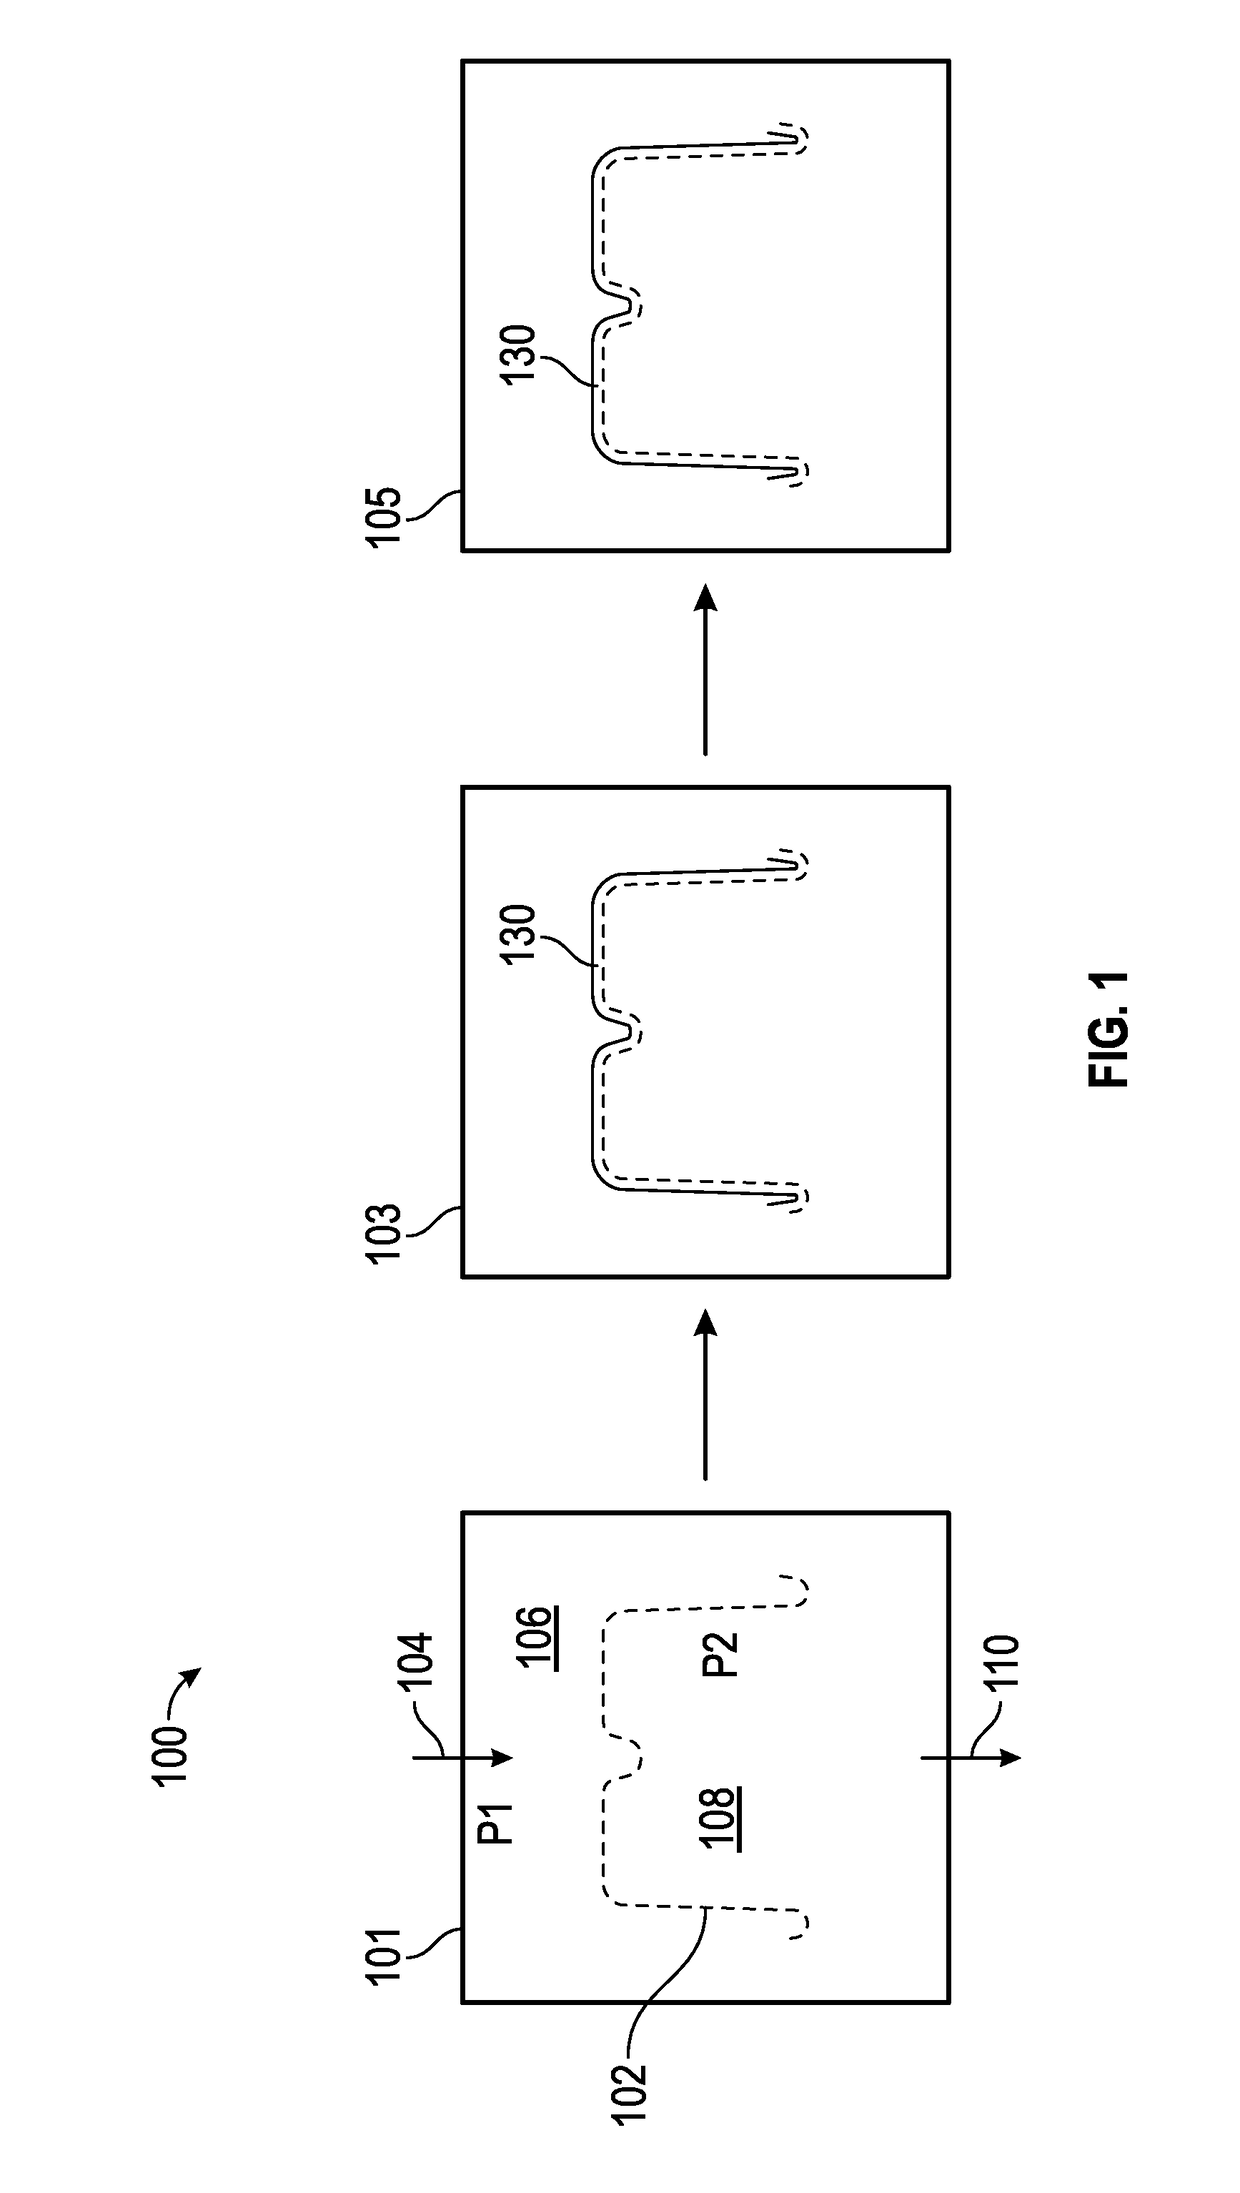 Methods and Apparatus For Manufacturing Fiber-Based Meat Containers